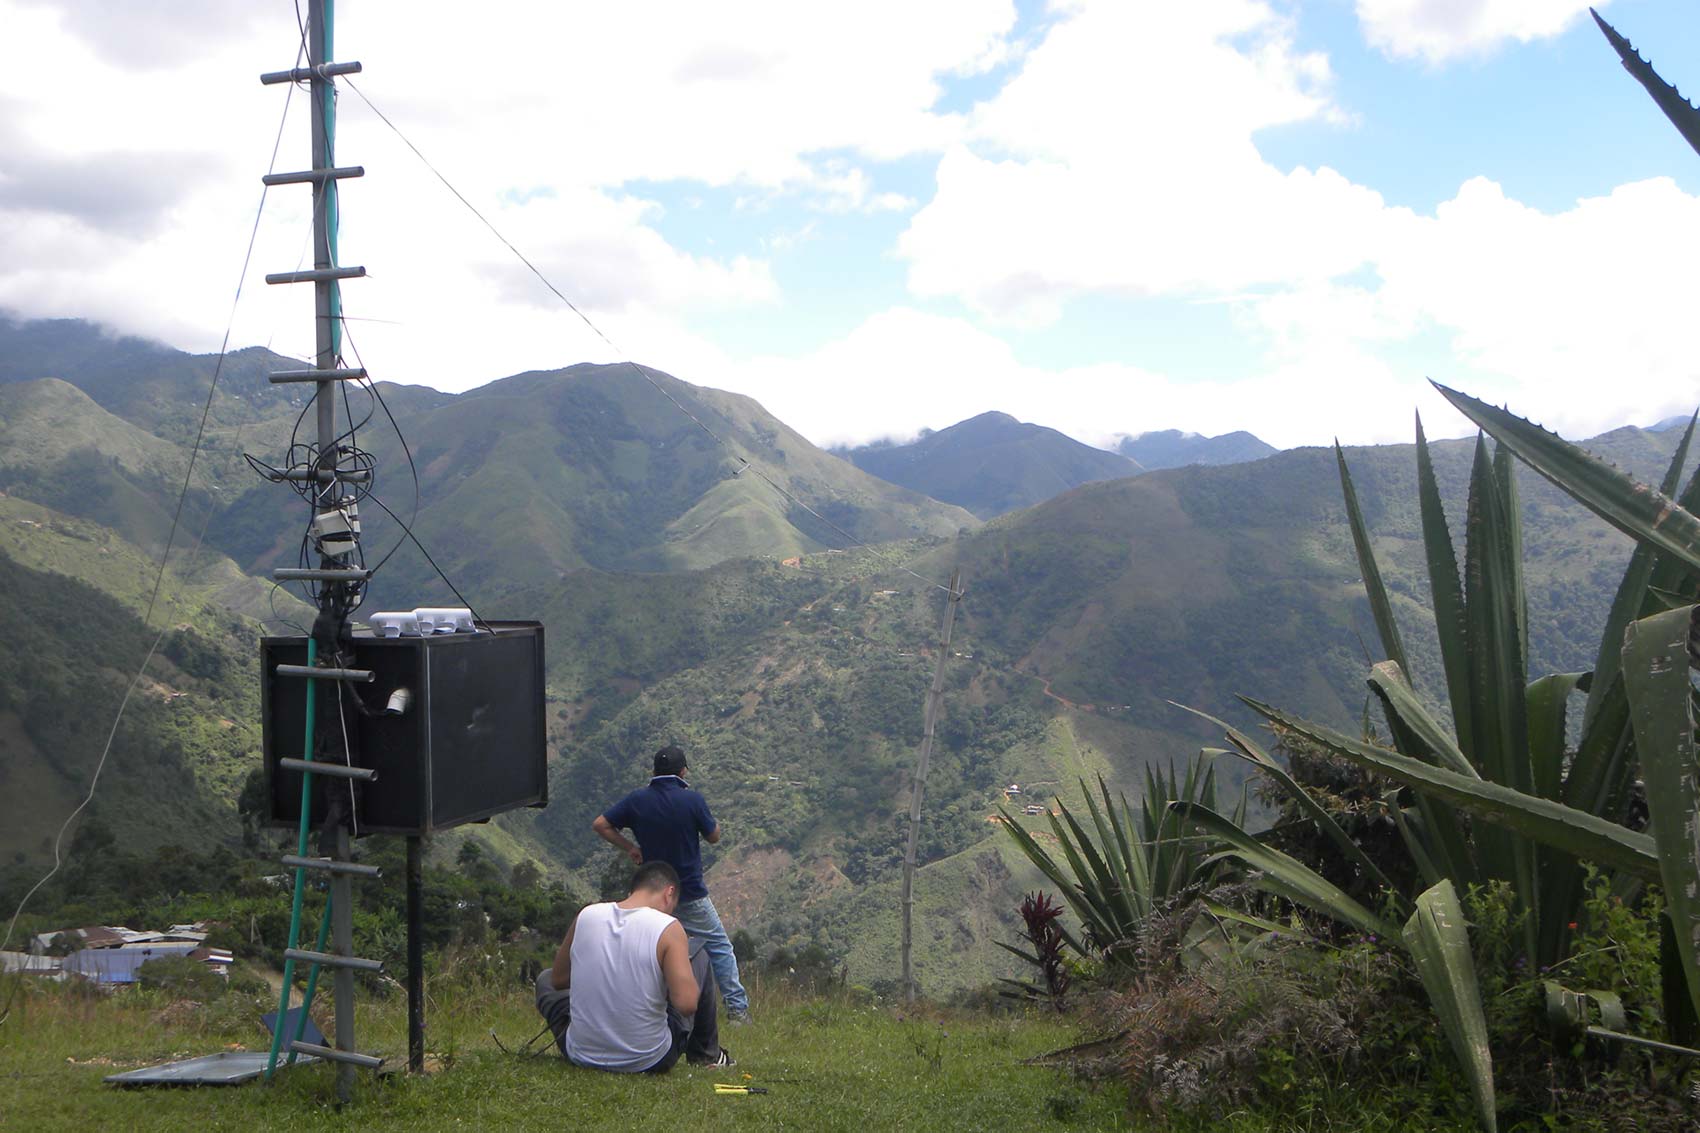 Image provided by Colnodo of remote location in Colombia where community networks are being implemented